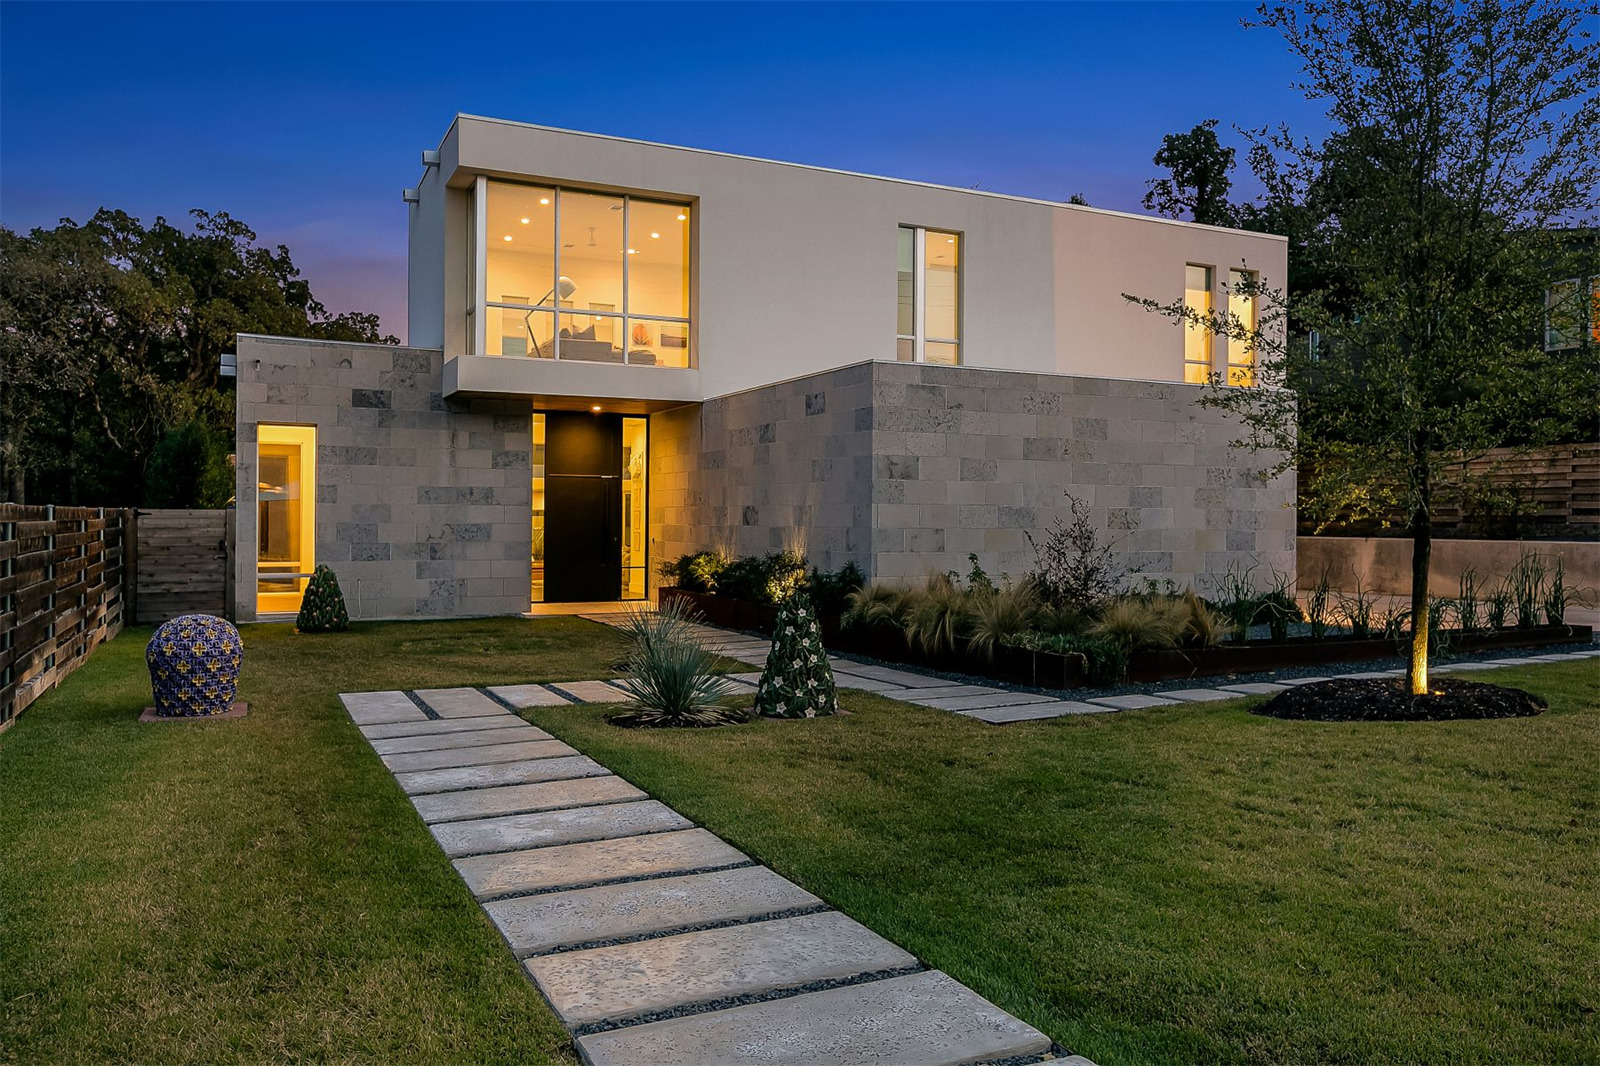 Blocky stucco-and-concrete home with lawn in from